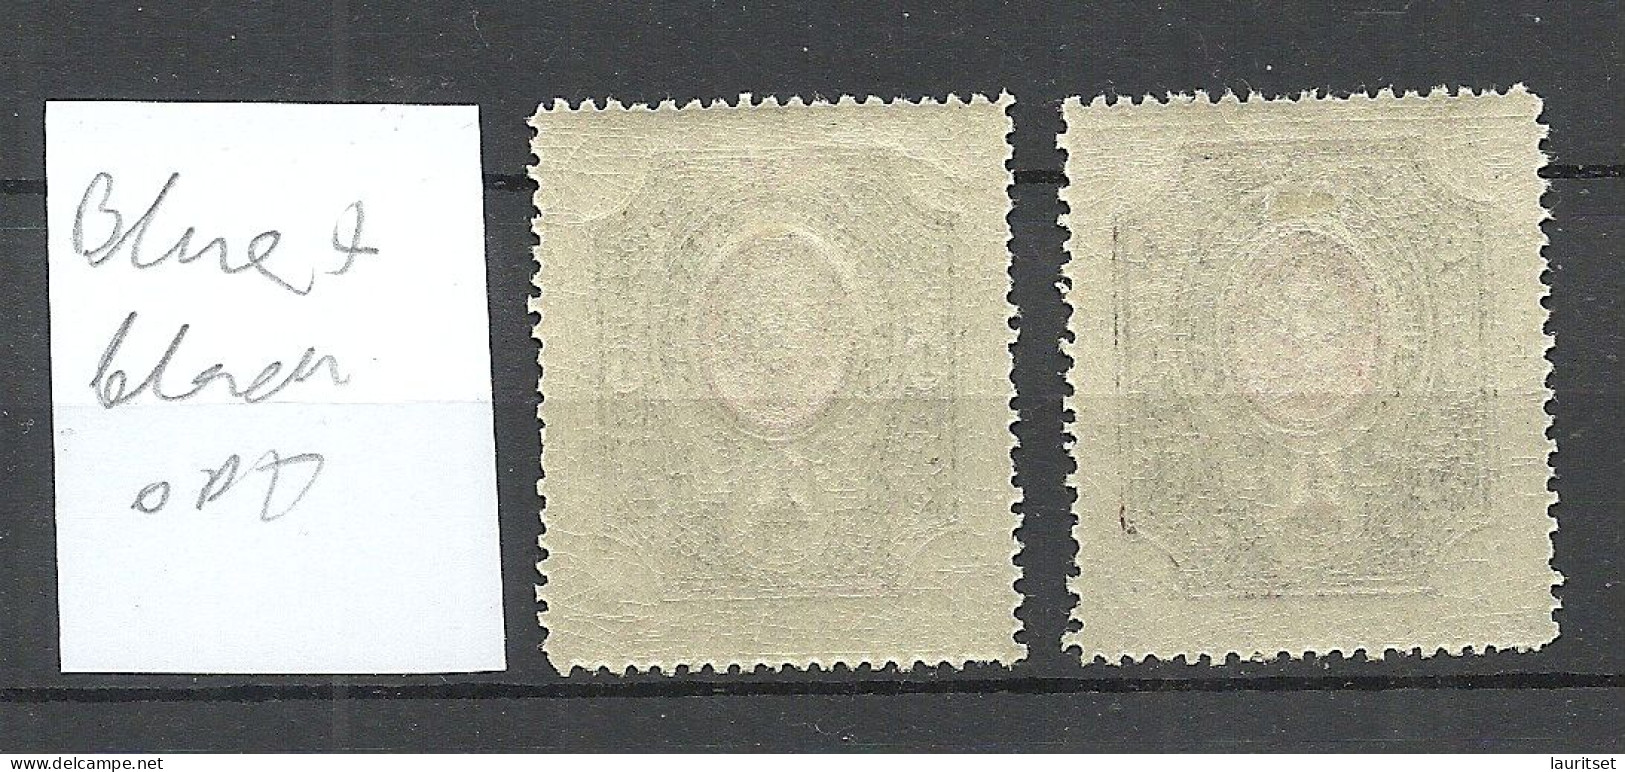 Russia RUSSLAND 1920 Civil War Wrangel Army Camp Post At Gallipoli 20 000 On 1 R. Perforated Black + Blue OPT * - Wrangel Army